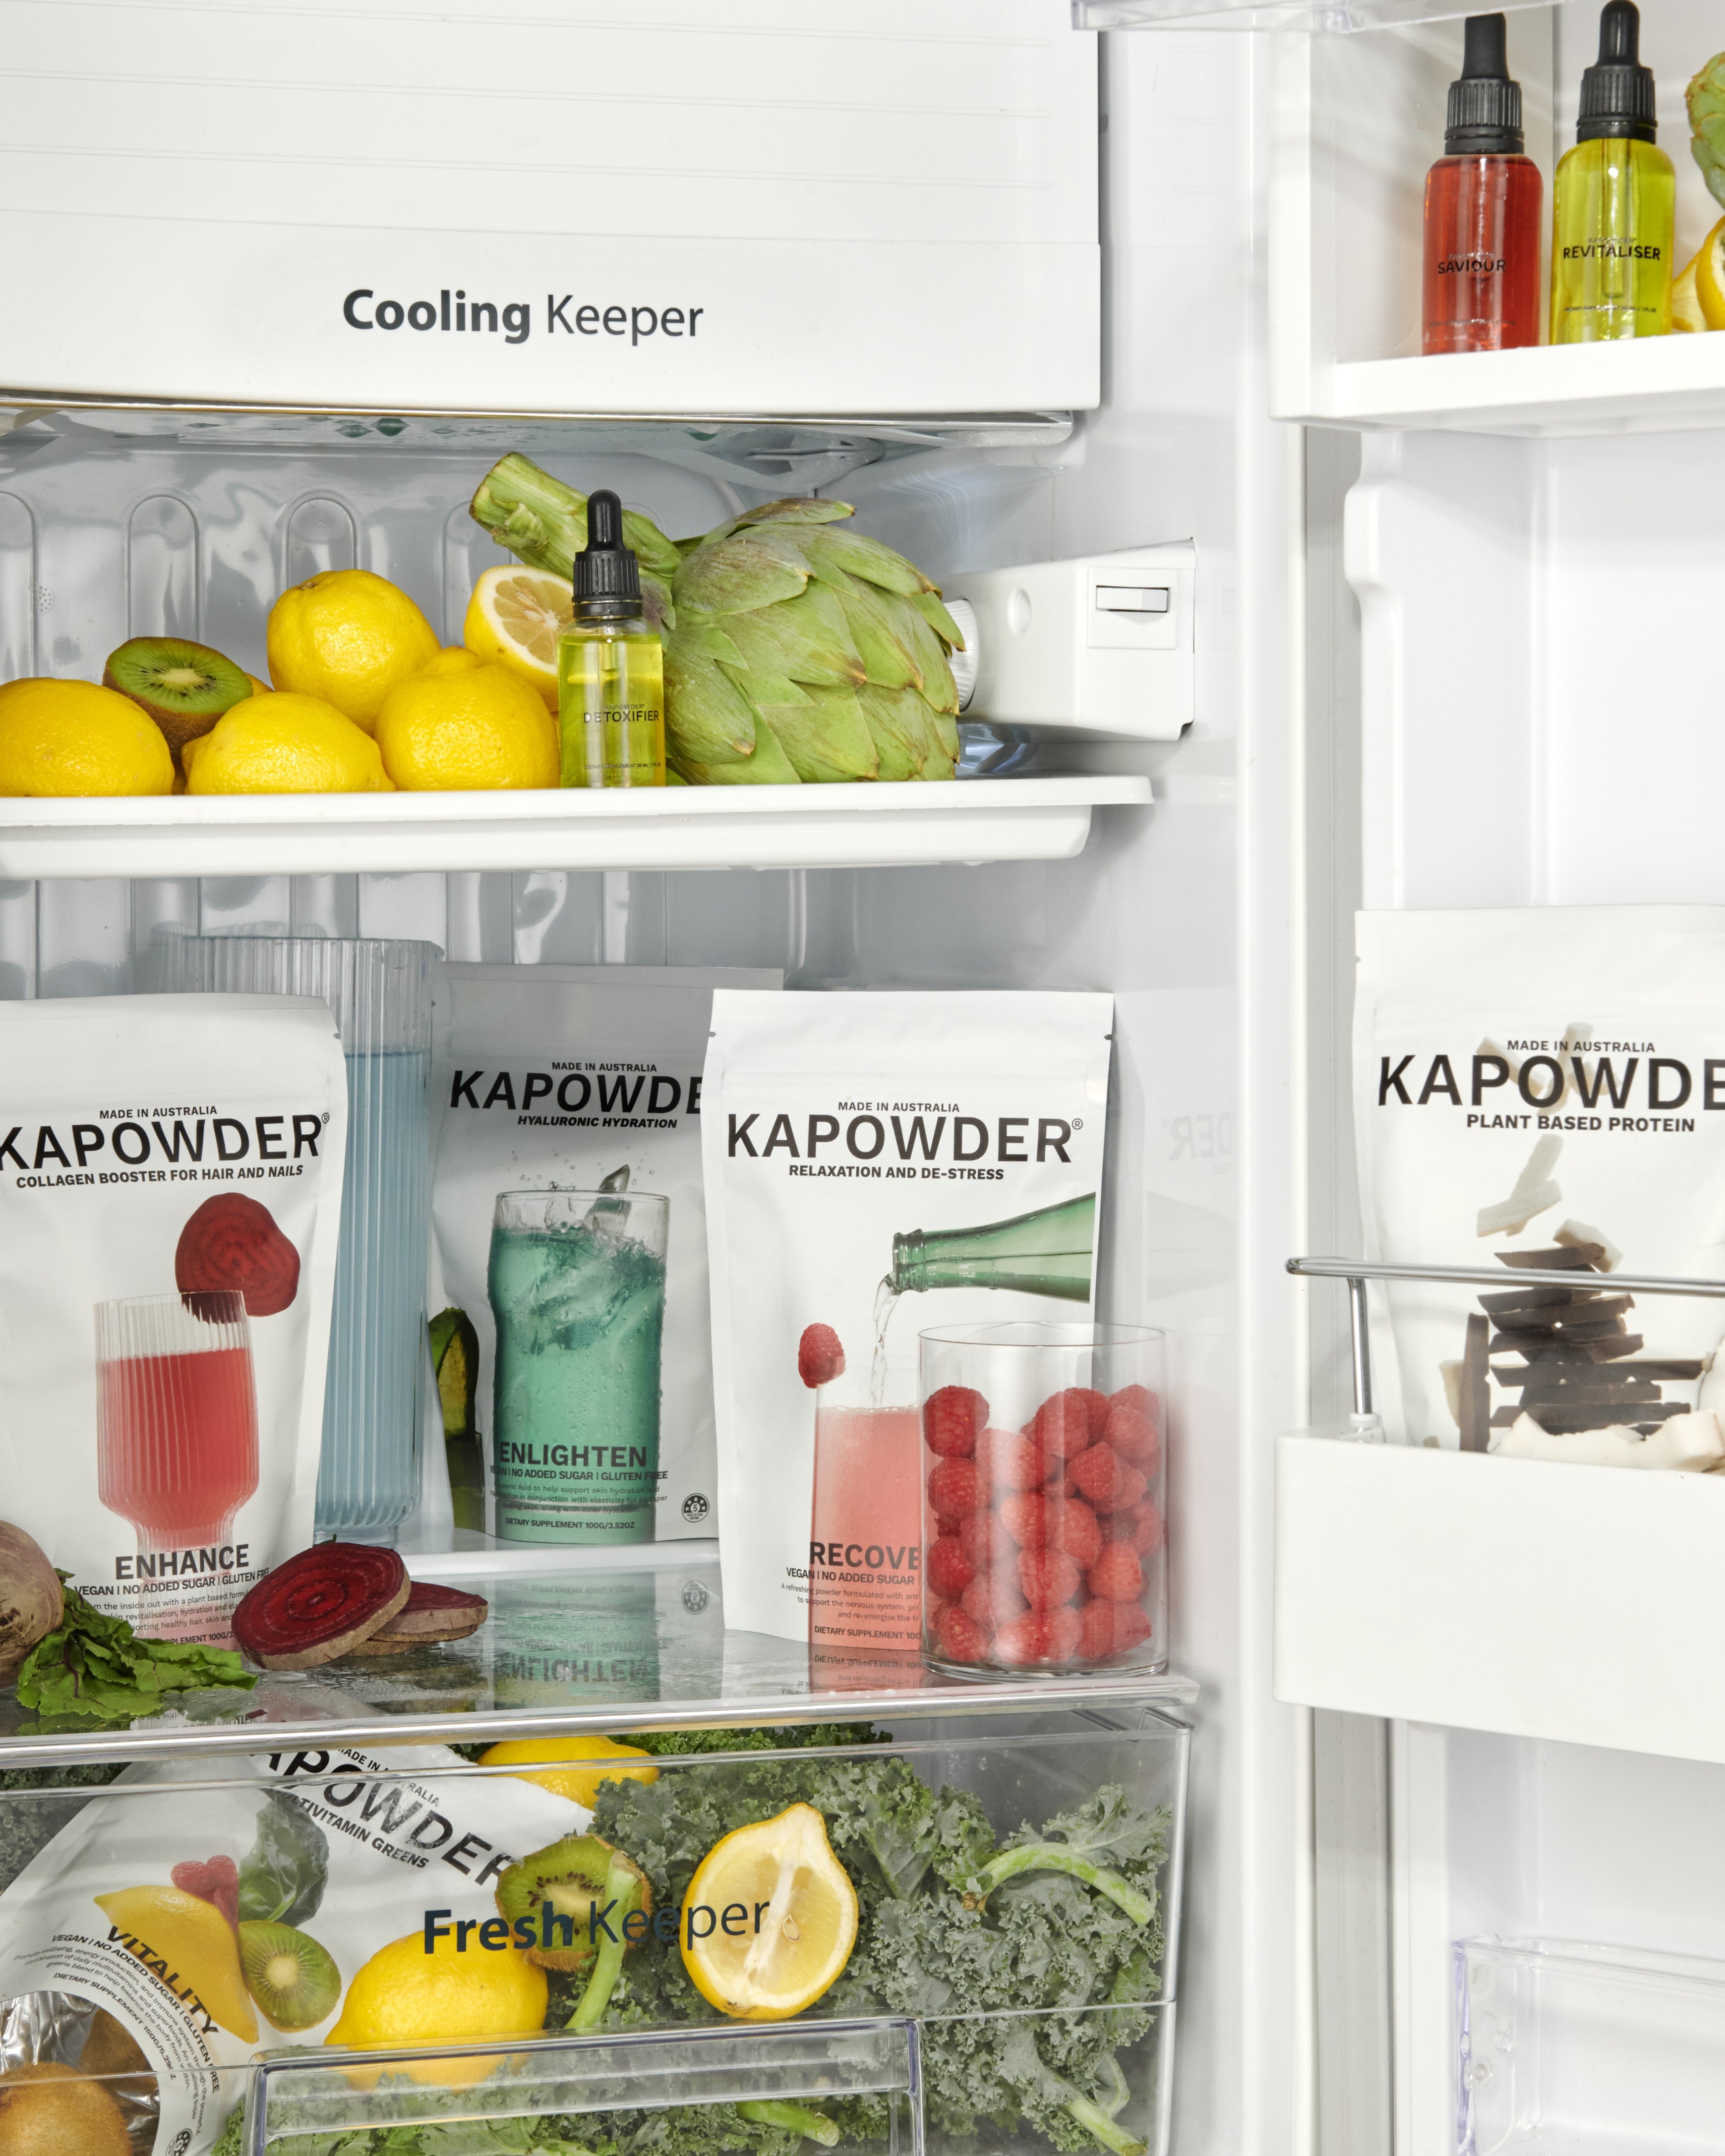 Image of KAPOWDER products in a fridge surrounded by fruit and vegetables highlighting nutrients and vitamins available in the products.